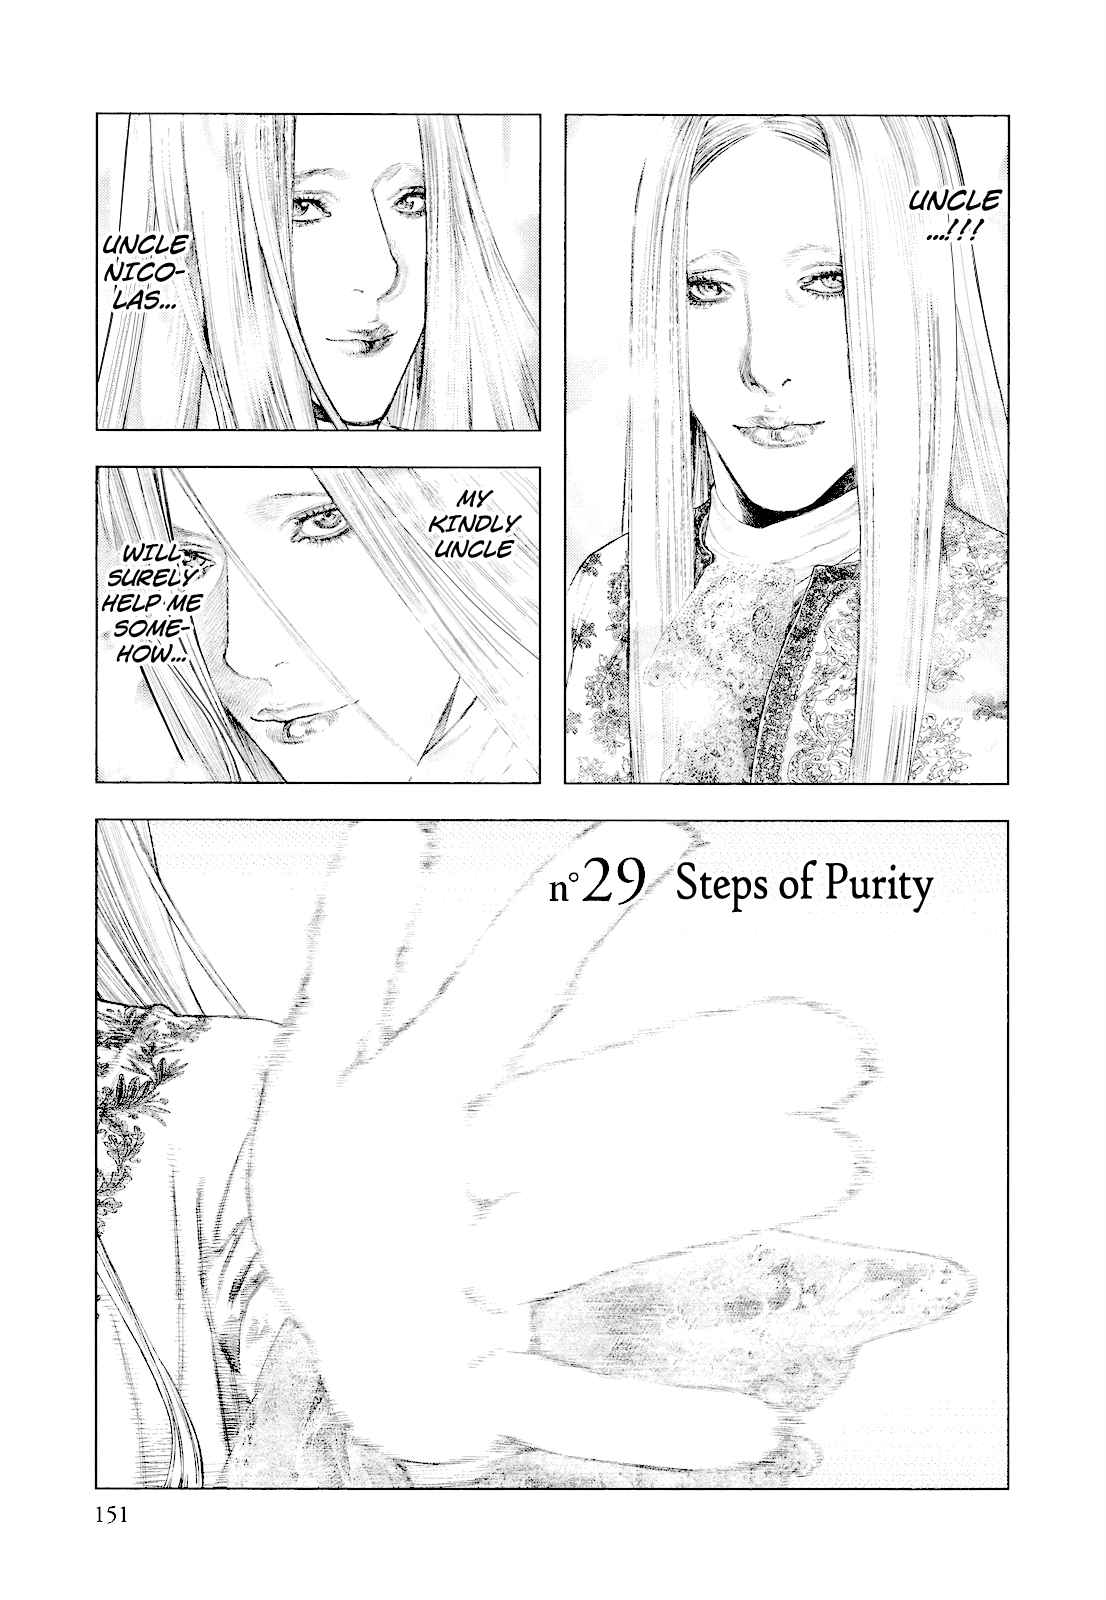 Innocent Vol. 3 Ch. 29 Steps of Purity